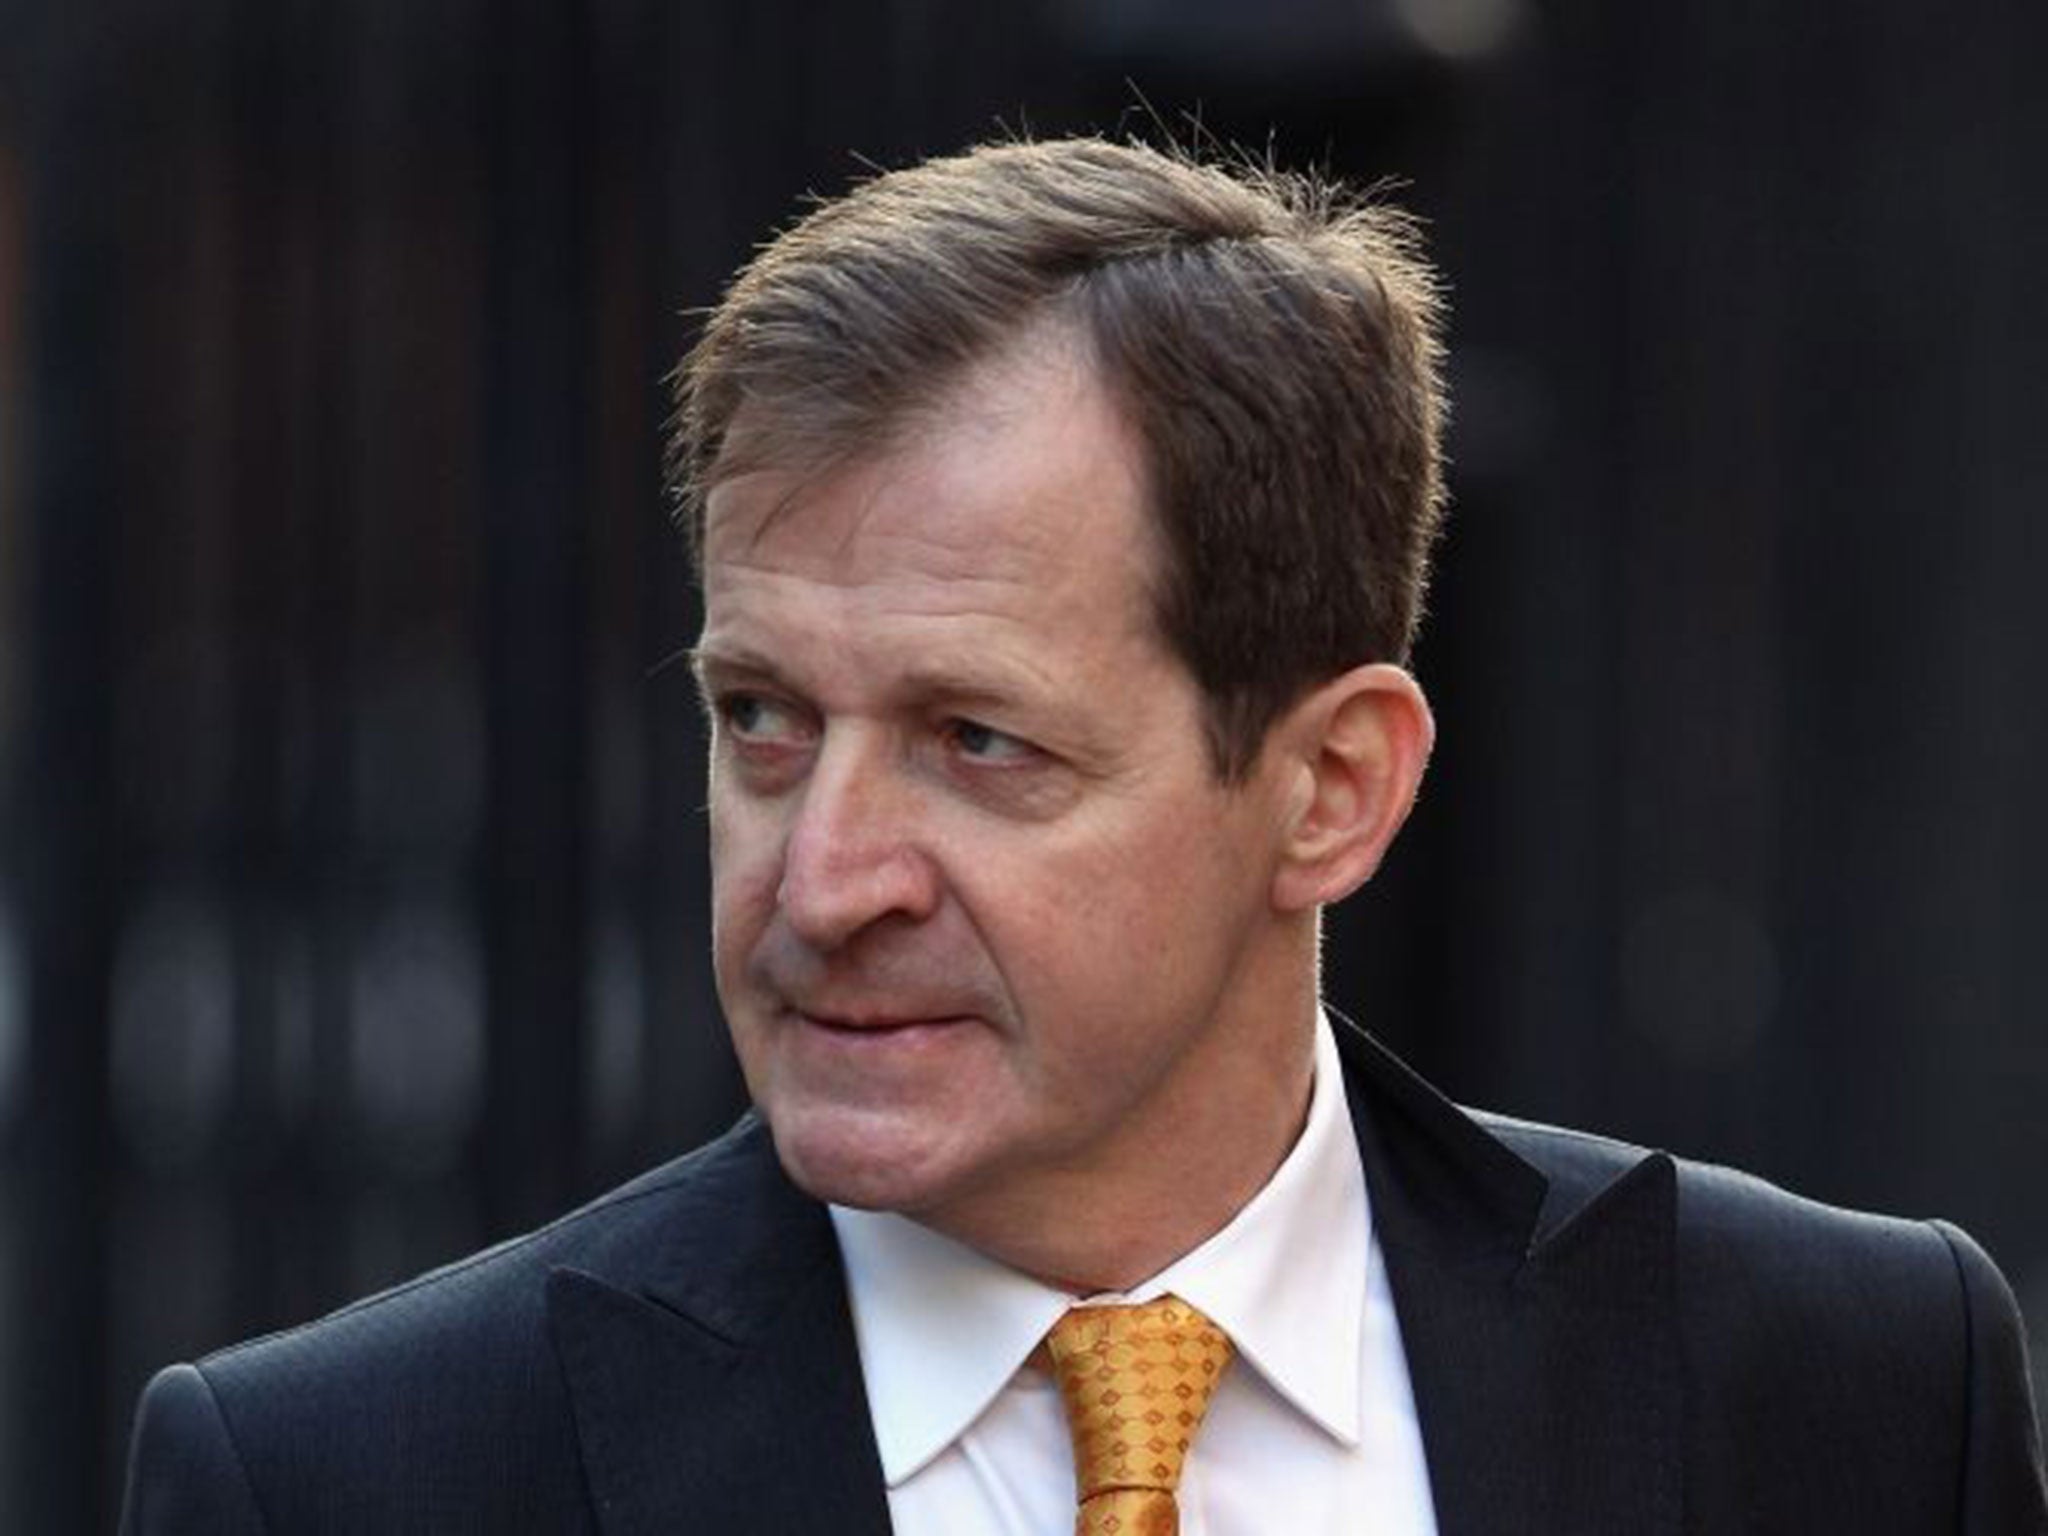 Alastair Campbell urges parties to give mental health the priority it deserves